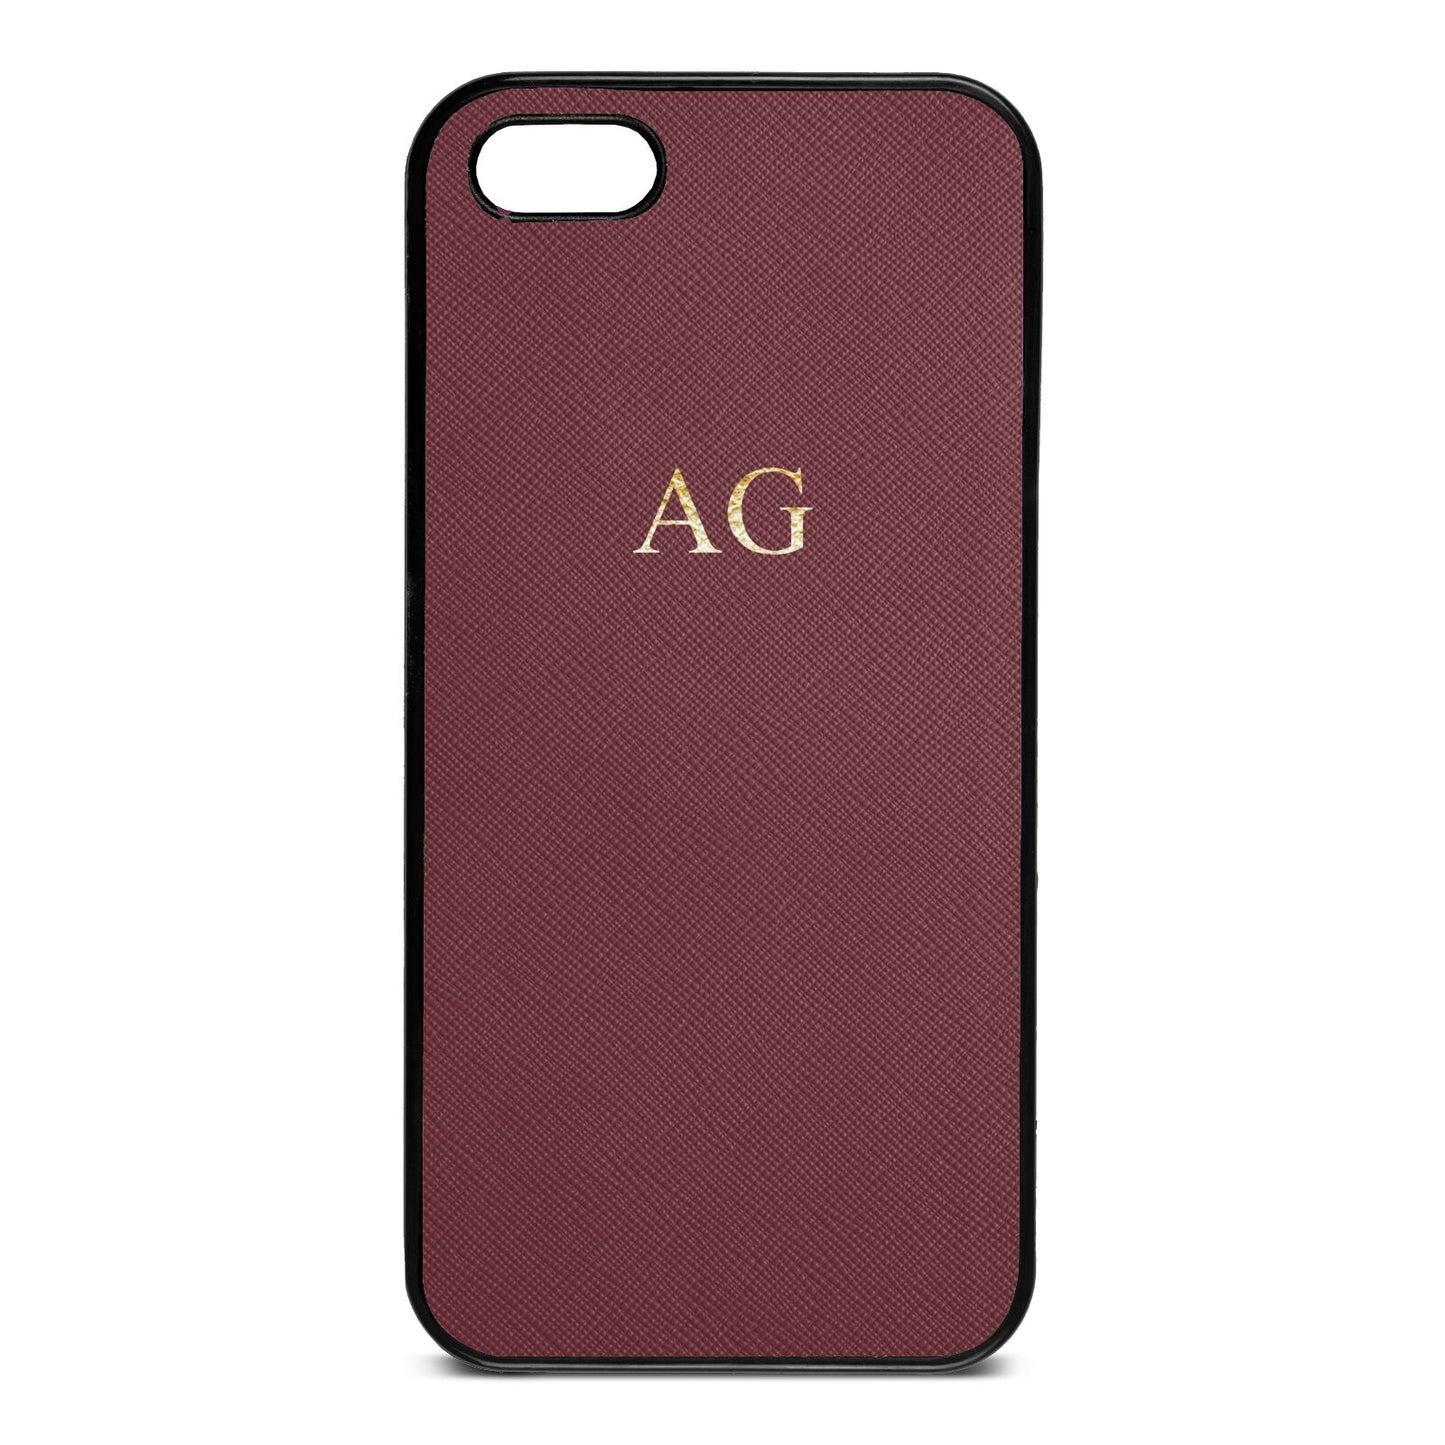 Personalised Rose Brown Saffiano Leather iPhone 5 Case